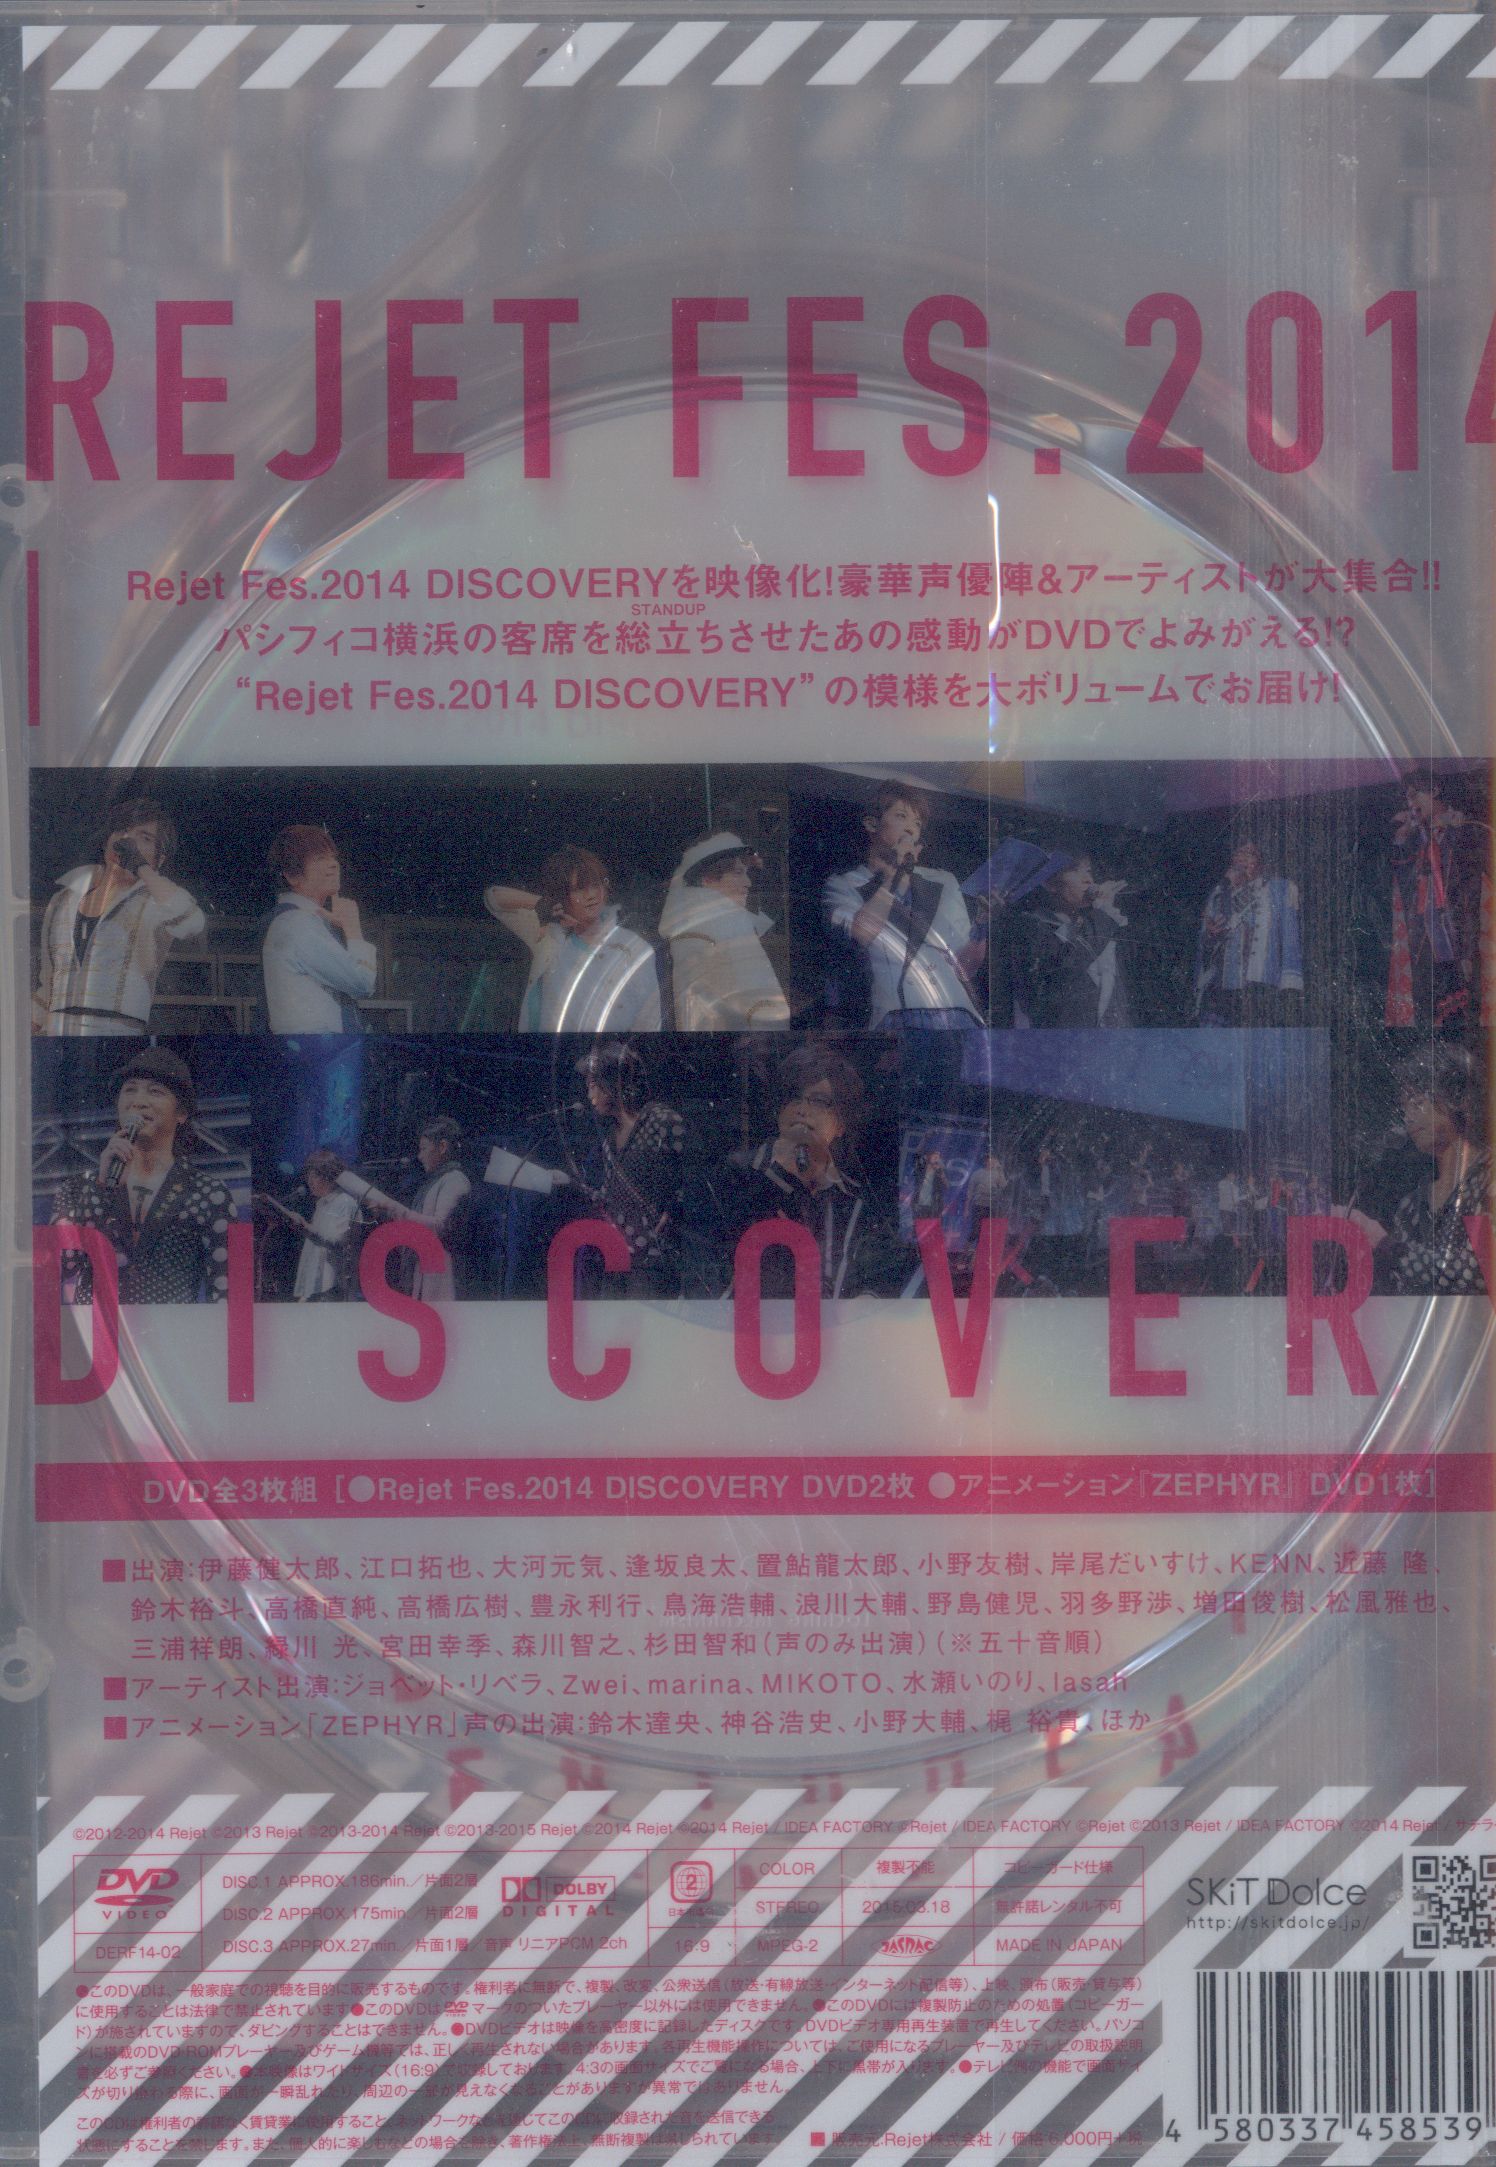 Rejet Fes.2014 DISCOVERY Limited Edition - キャラクターグッズ